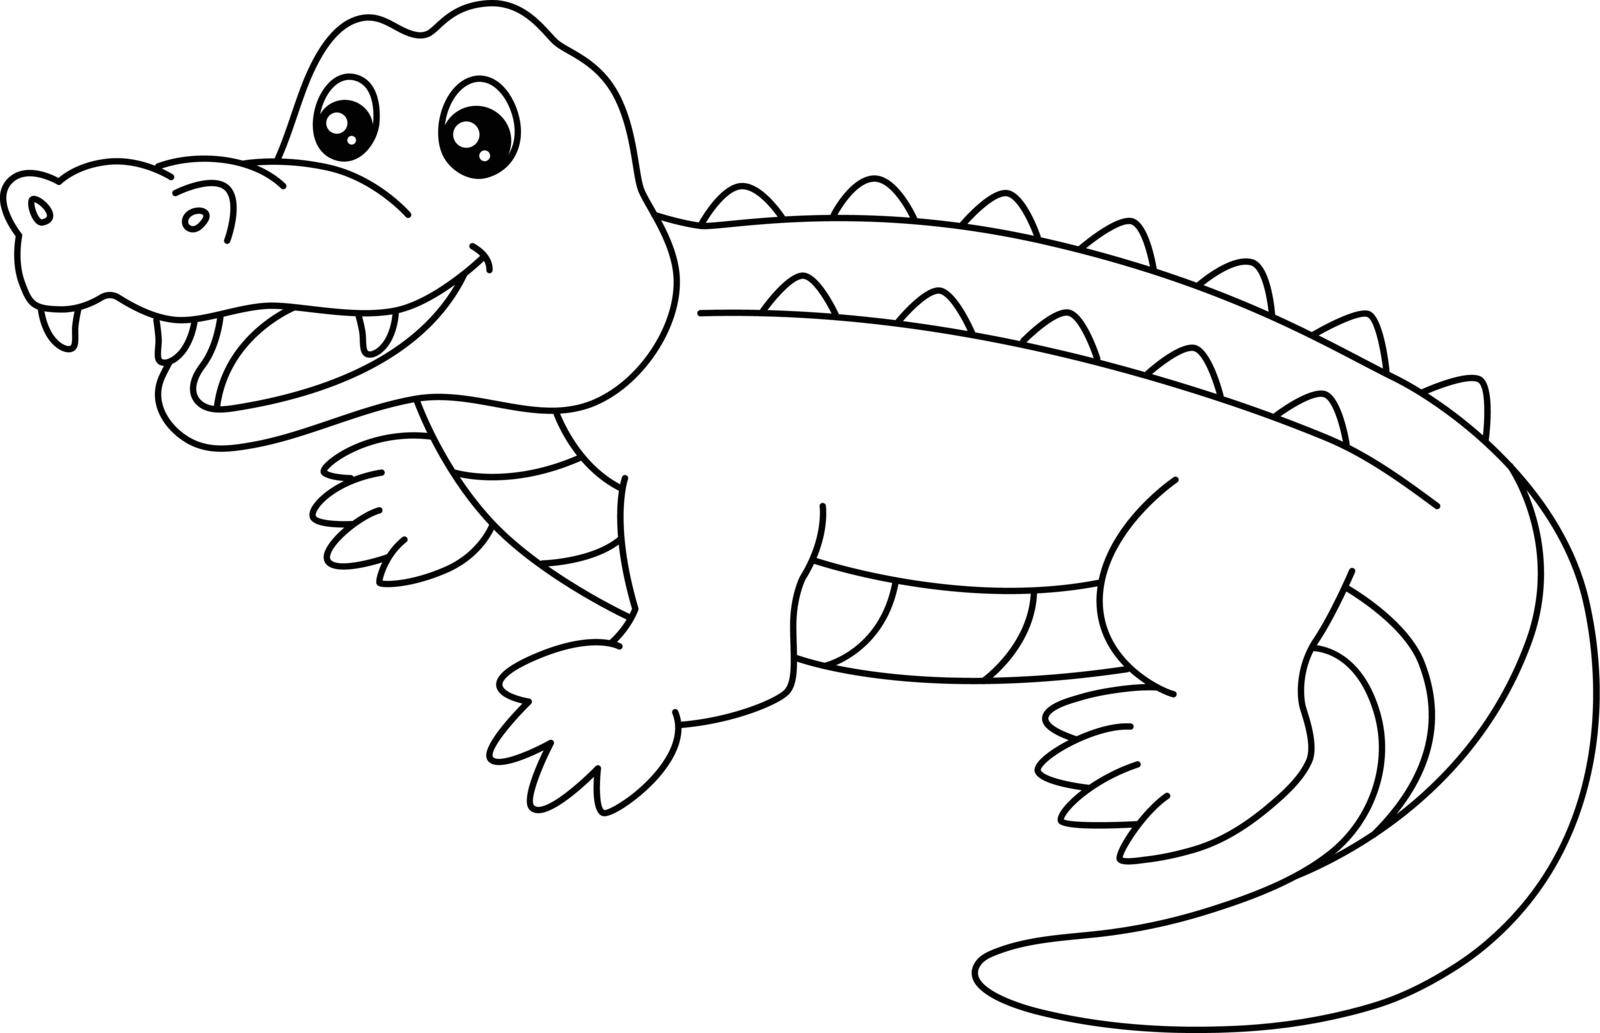 Crocodile Coloring Page Isolated for Kids by abbydesign